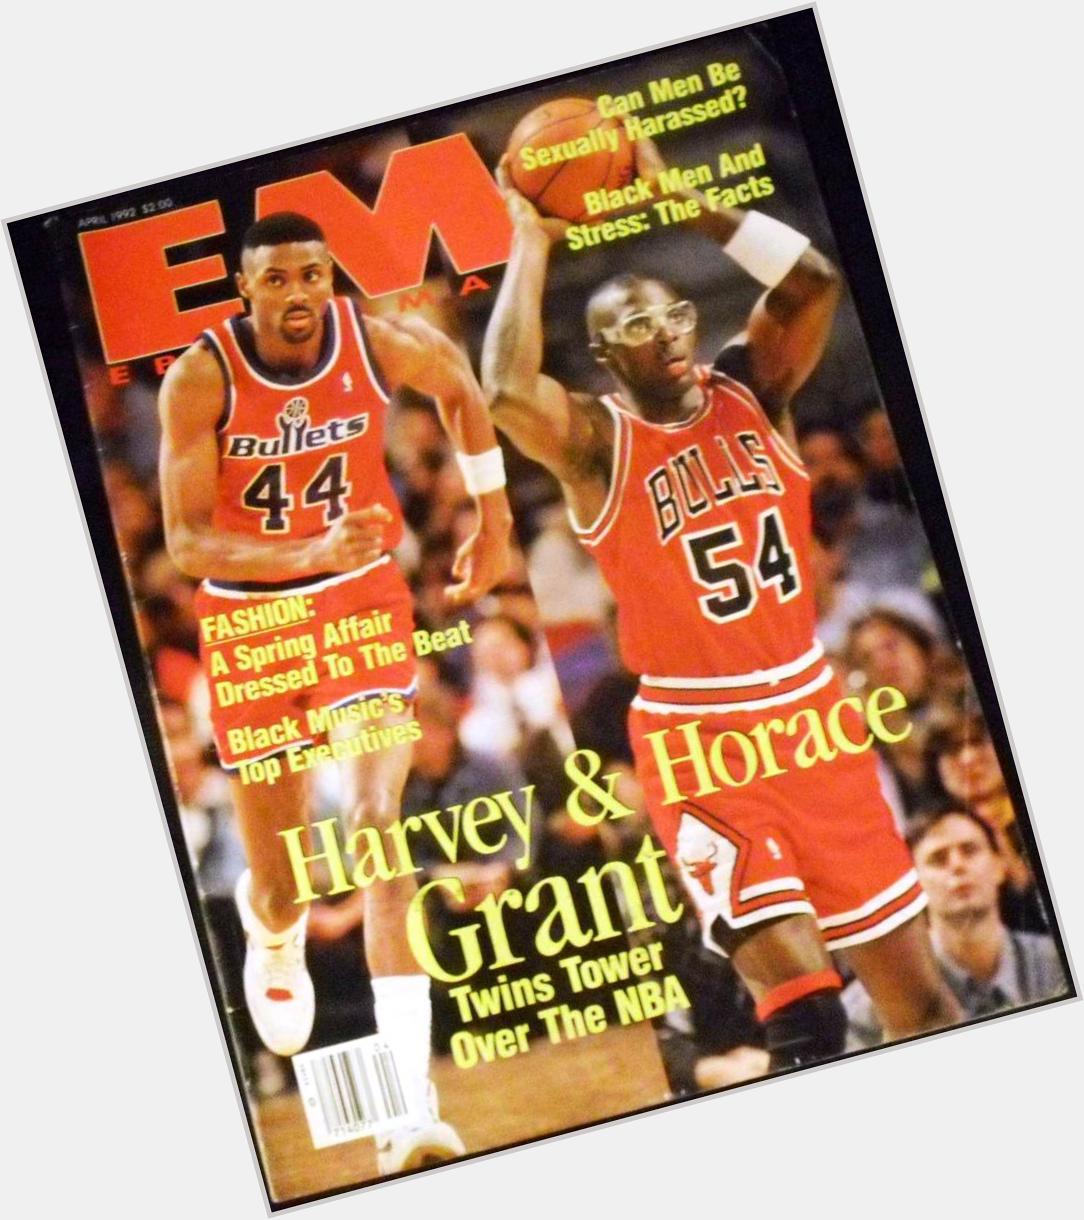 HAPPY BIRTHDAY TO THE TWIN TOWERS. Literally Twins and Harvey Grant 